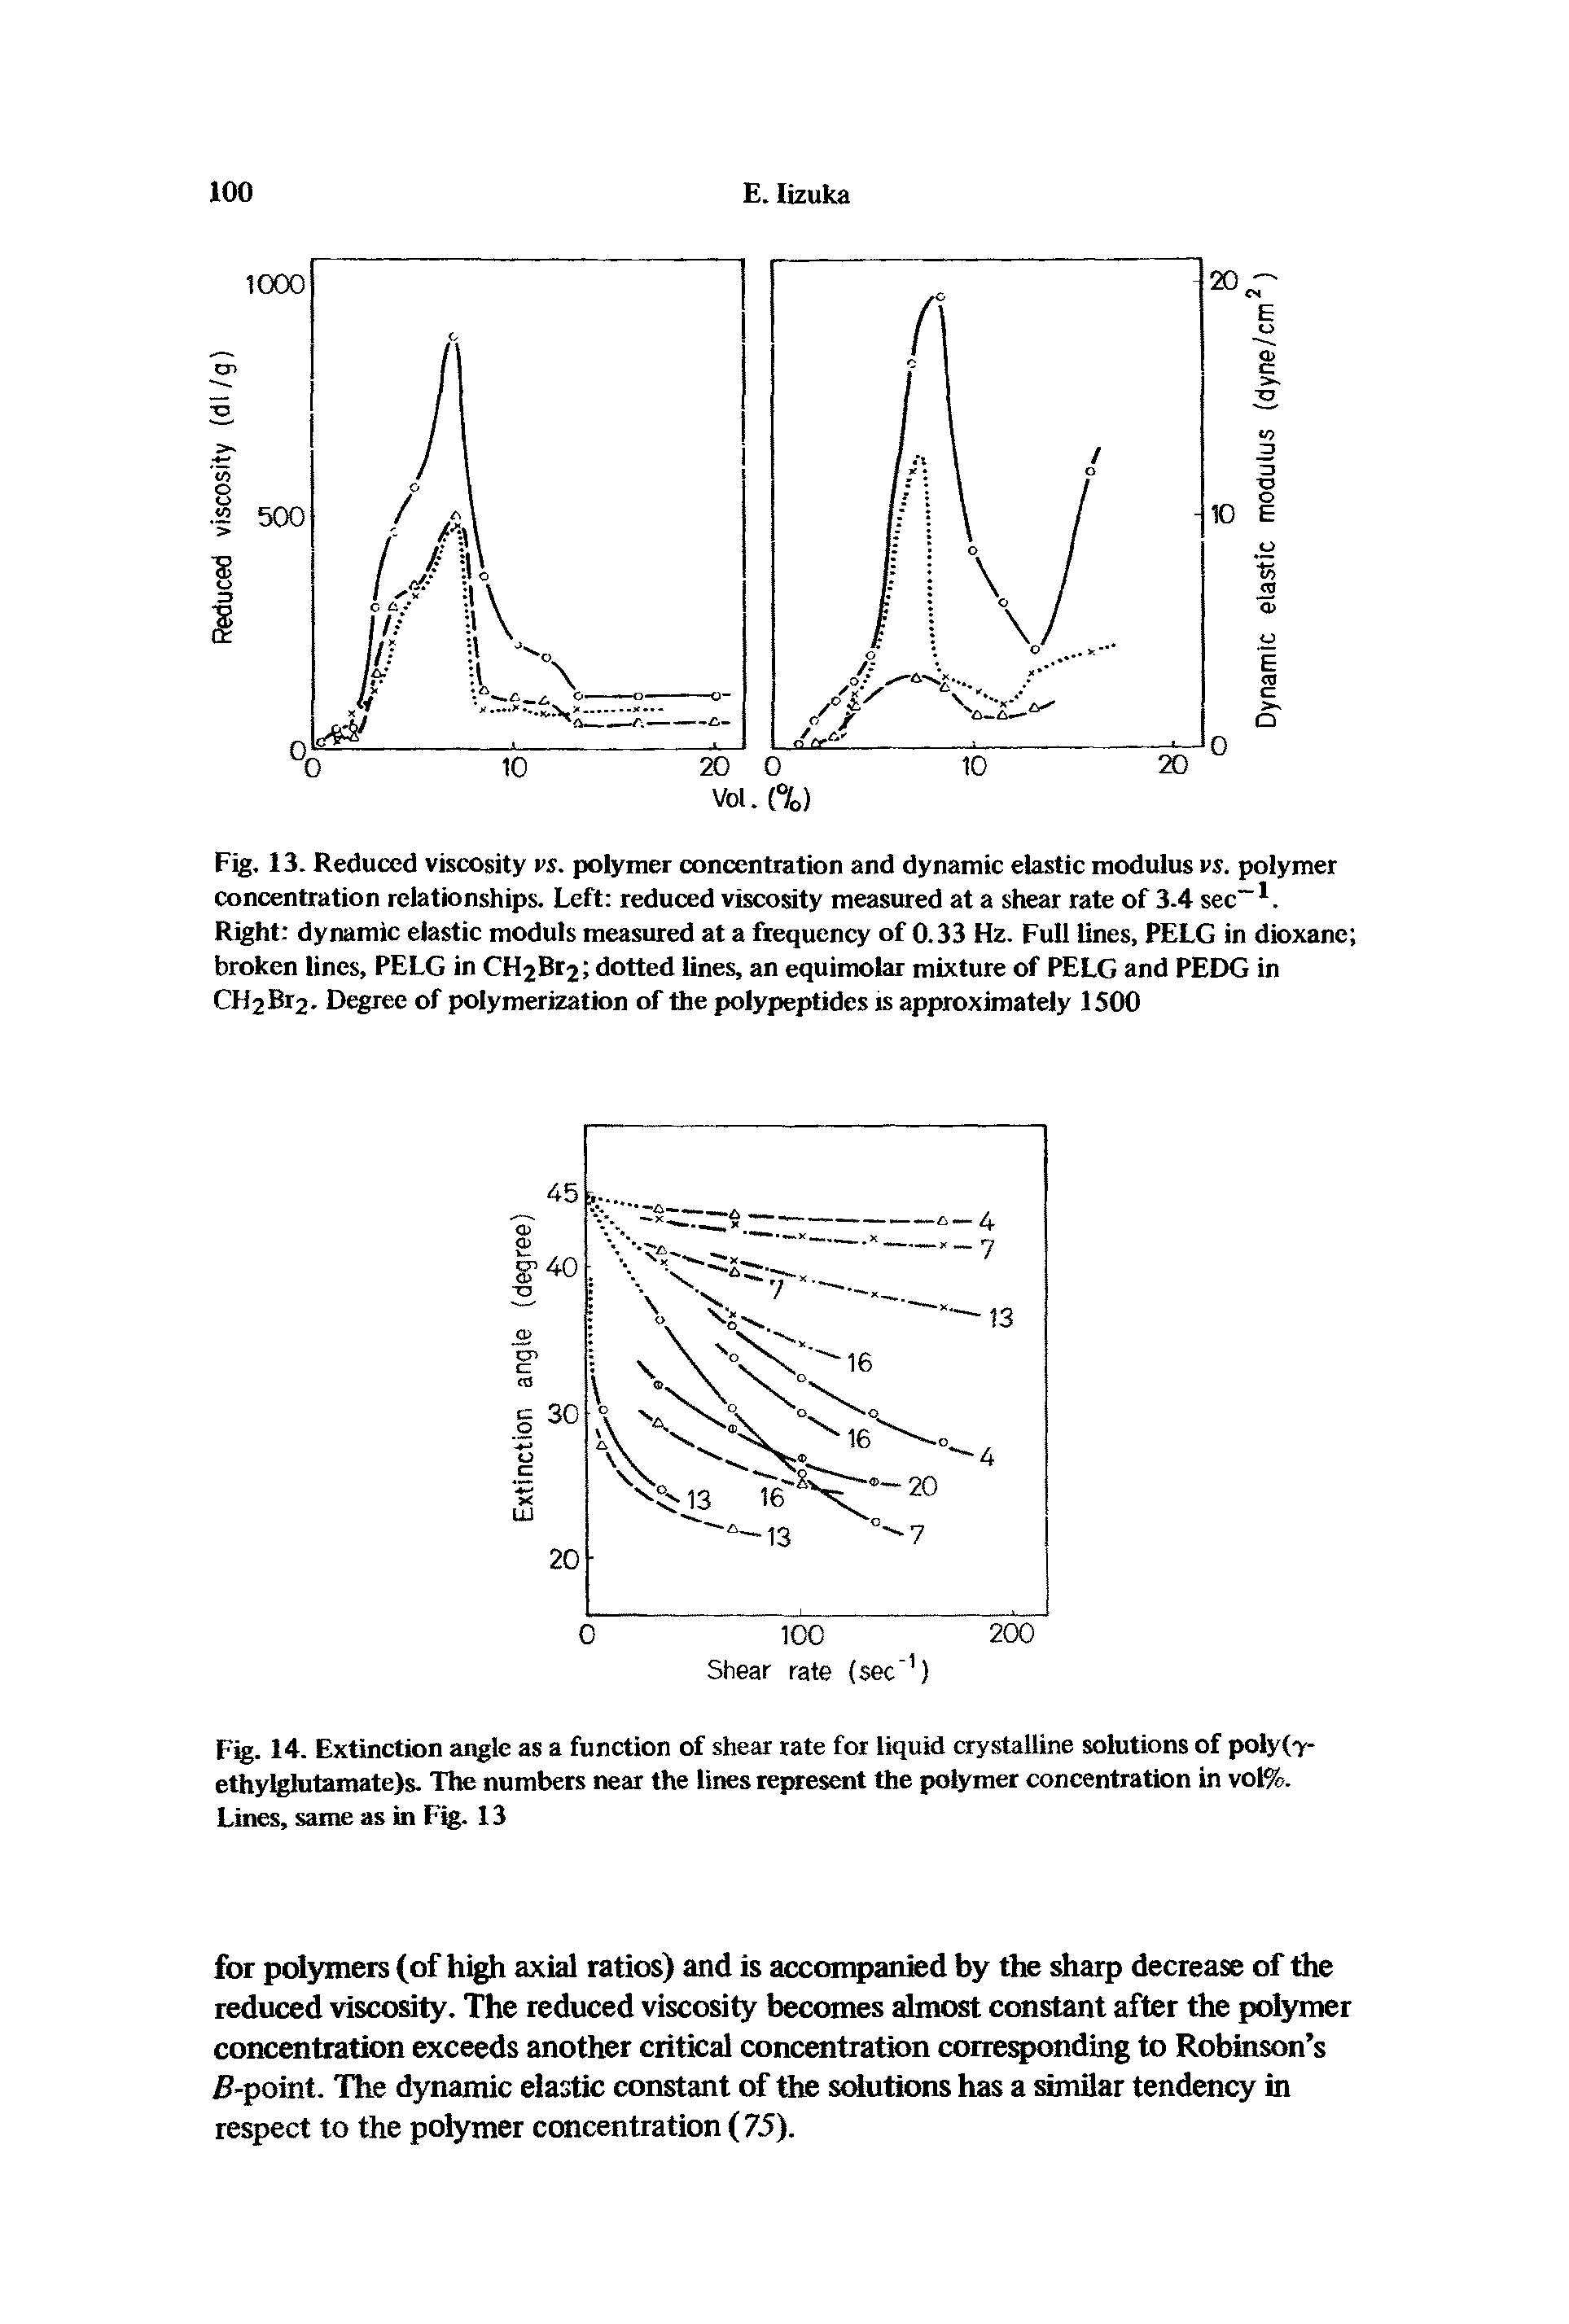 Fig. 14. Extinction aiigle as a function of shear rate for liquid crystalline solutions of polyf-y-ethylgbitamatels. The numbers near the lines represent the polymer concentration in vol%. Lines, same as in F 13...